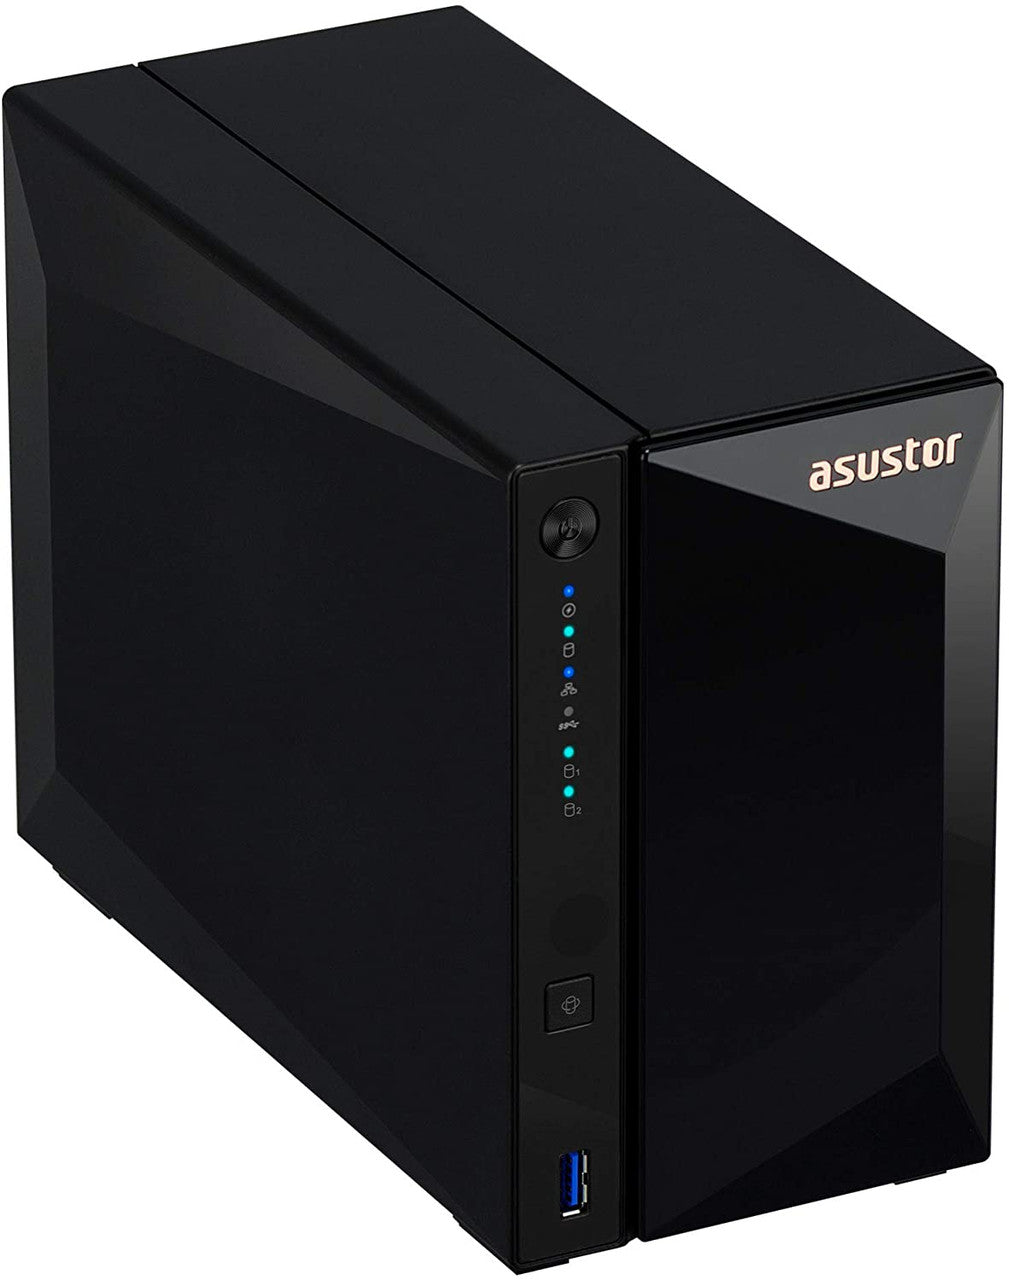 Asustor AS3302T 2-Bay Drivestor 2 PRO NAS with 2GB RAM and 4TB (2x2TB) Western Digital RED Plus Drives Fully Assembled and Tested